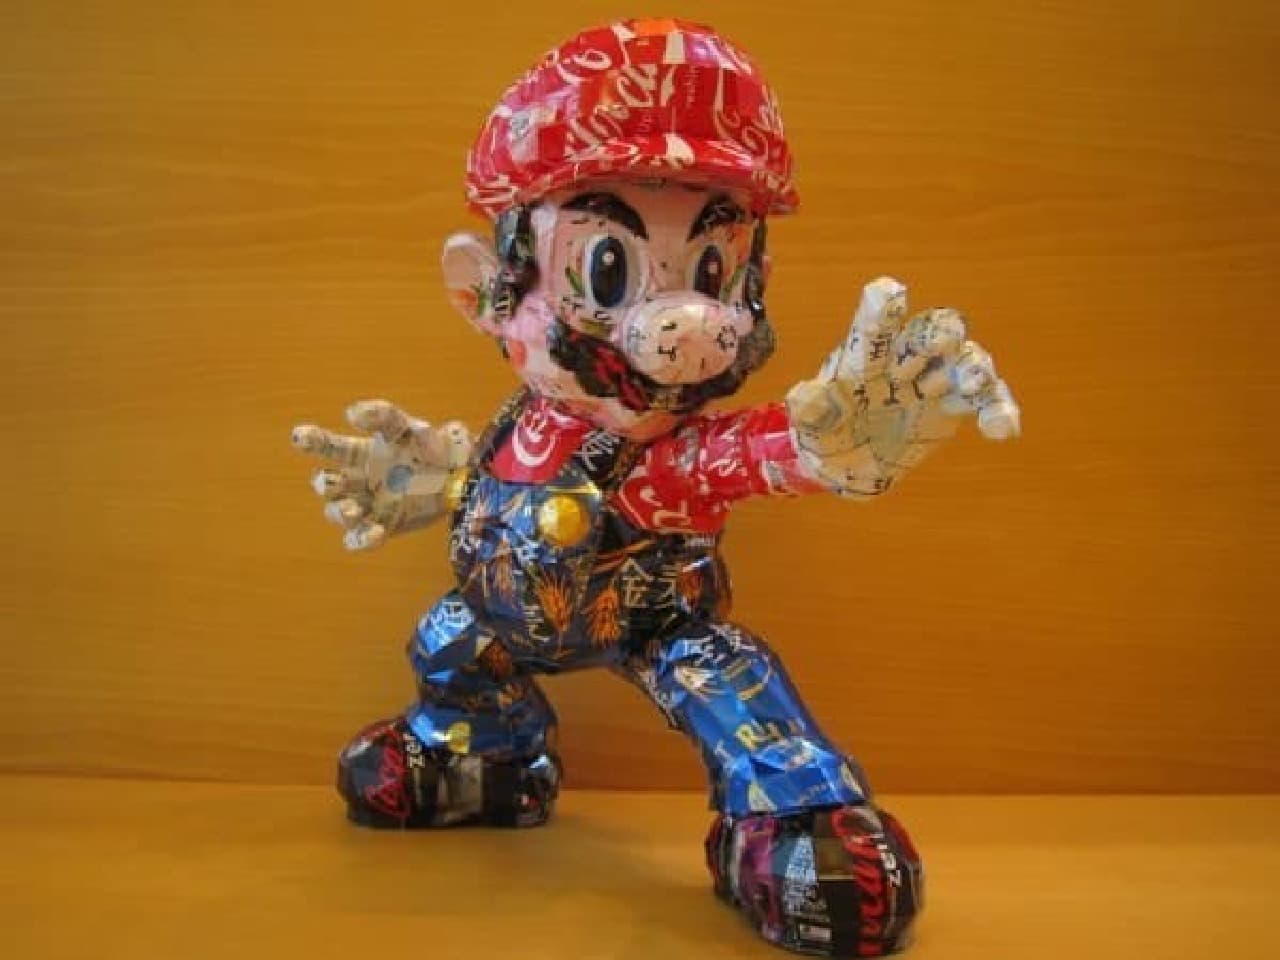 The letters "Mario" and "Kinmugi" made from empty cans are dazzling.